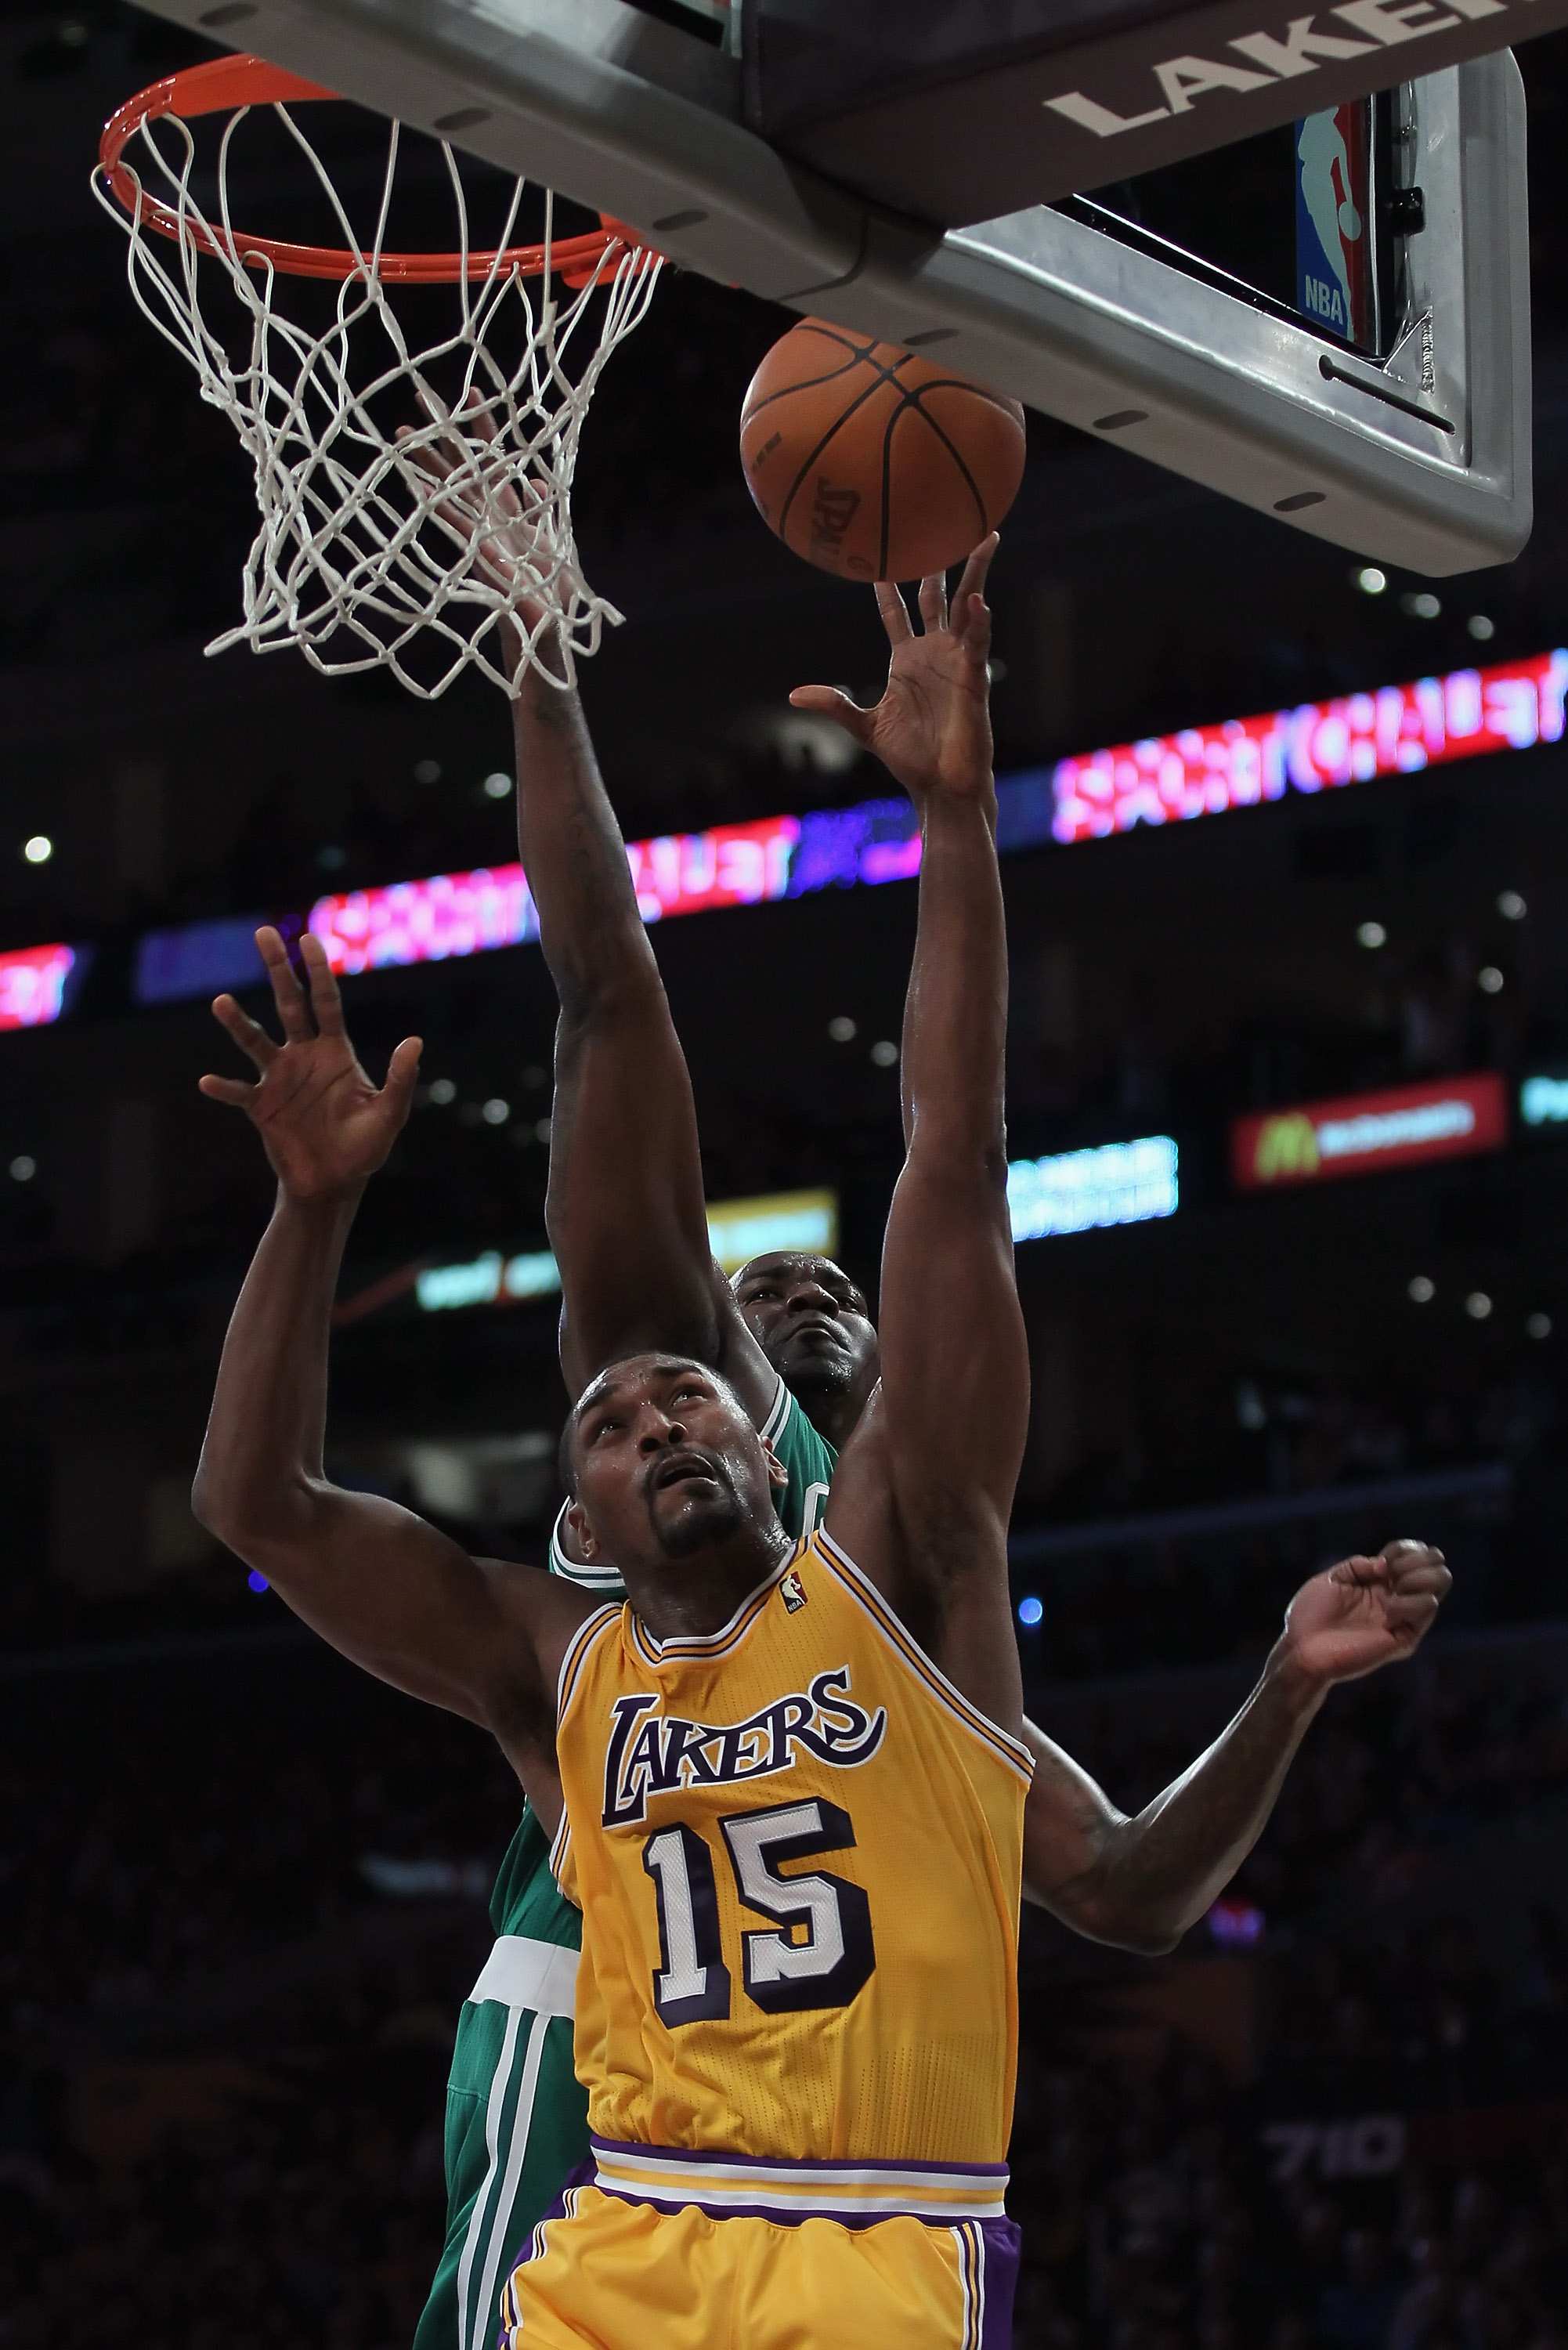 LOS ANGELES, CA - JANUARY 30:  Ron Artest #15 of the Los Angeles Lakers and Kendrick Perkins #43 of the Boston Celtics fight for a rebound in the first half at Staples Center on January 30, 2011 in Los Angeles, California.  (Photo by Jeff Gross/Getty Imag